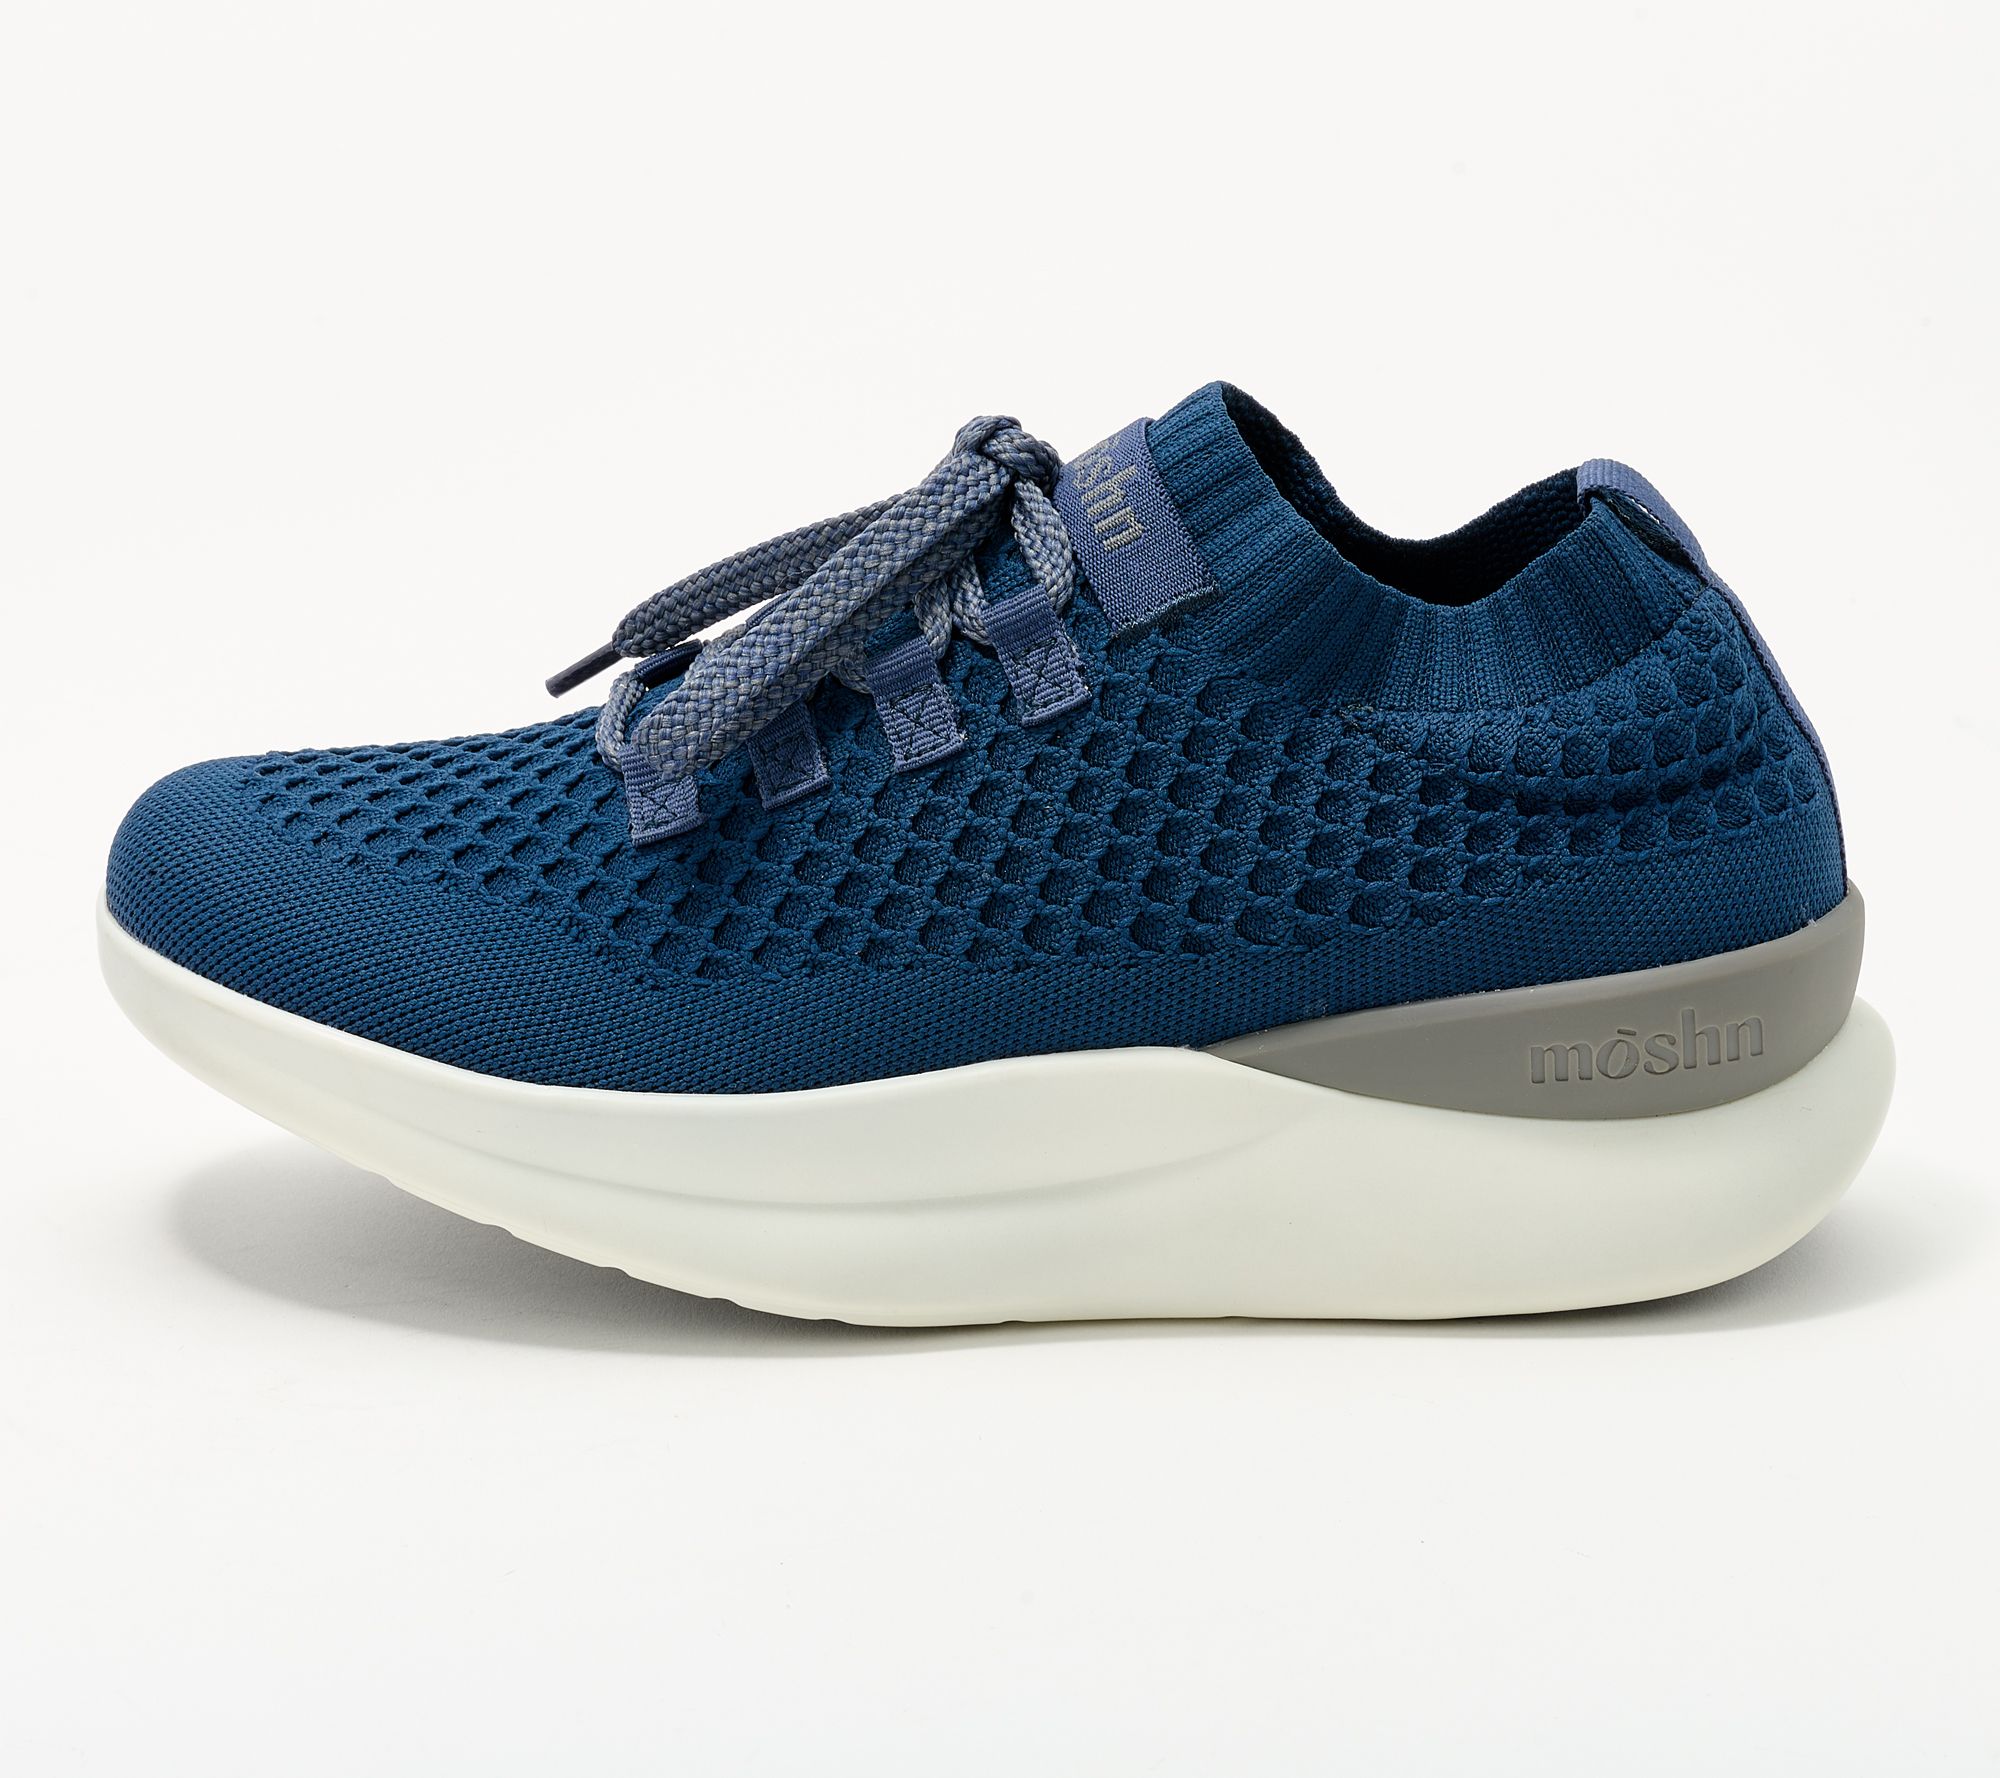 LOUIS VUITTON SNEAKERS Casual SHOES RUN Blue US 12 Fashion - clothing &  accessories - by owner - apparel sale 